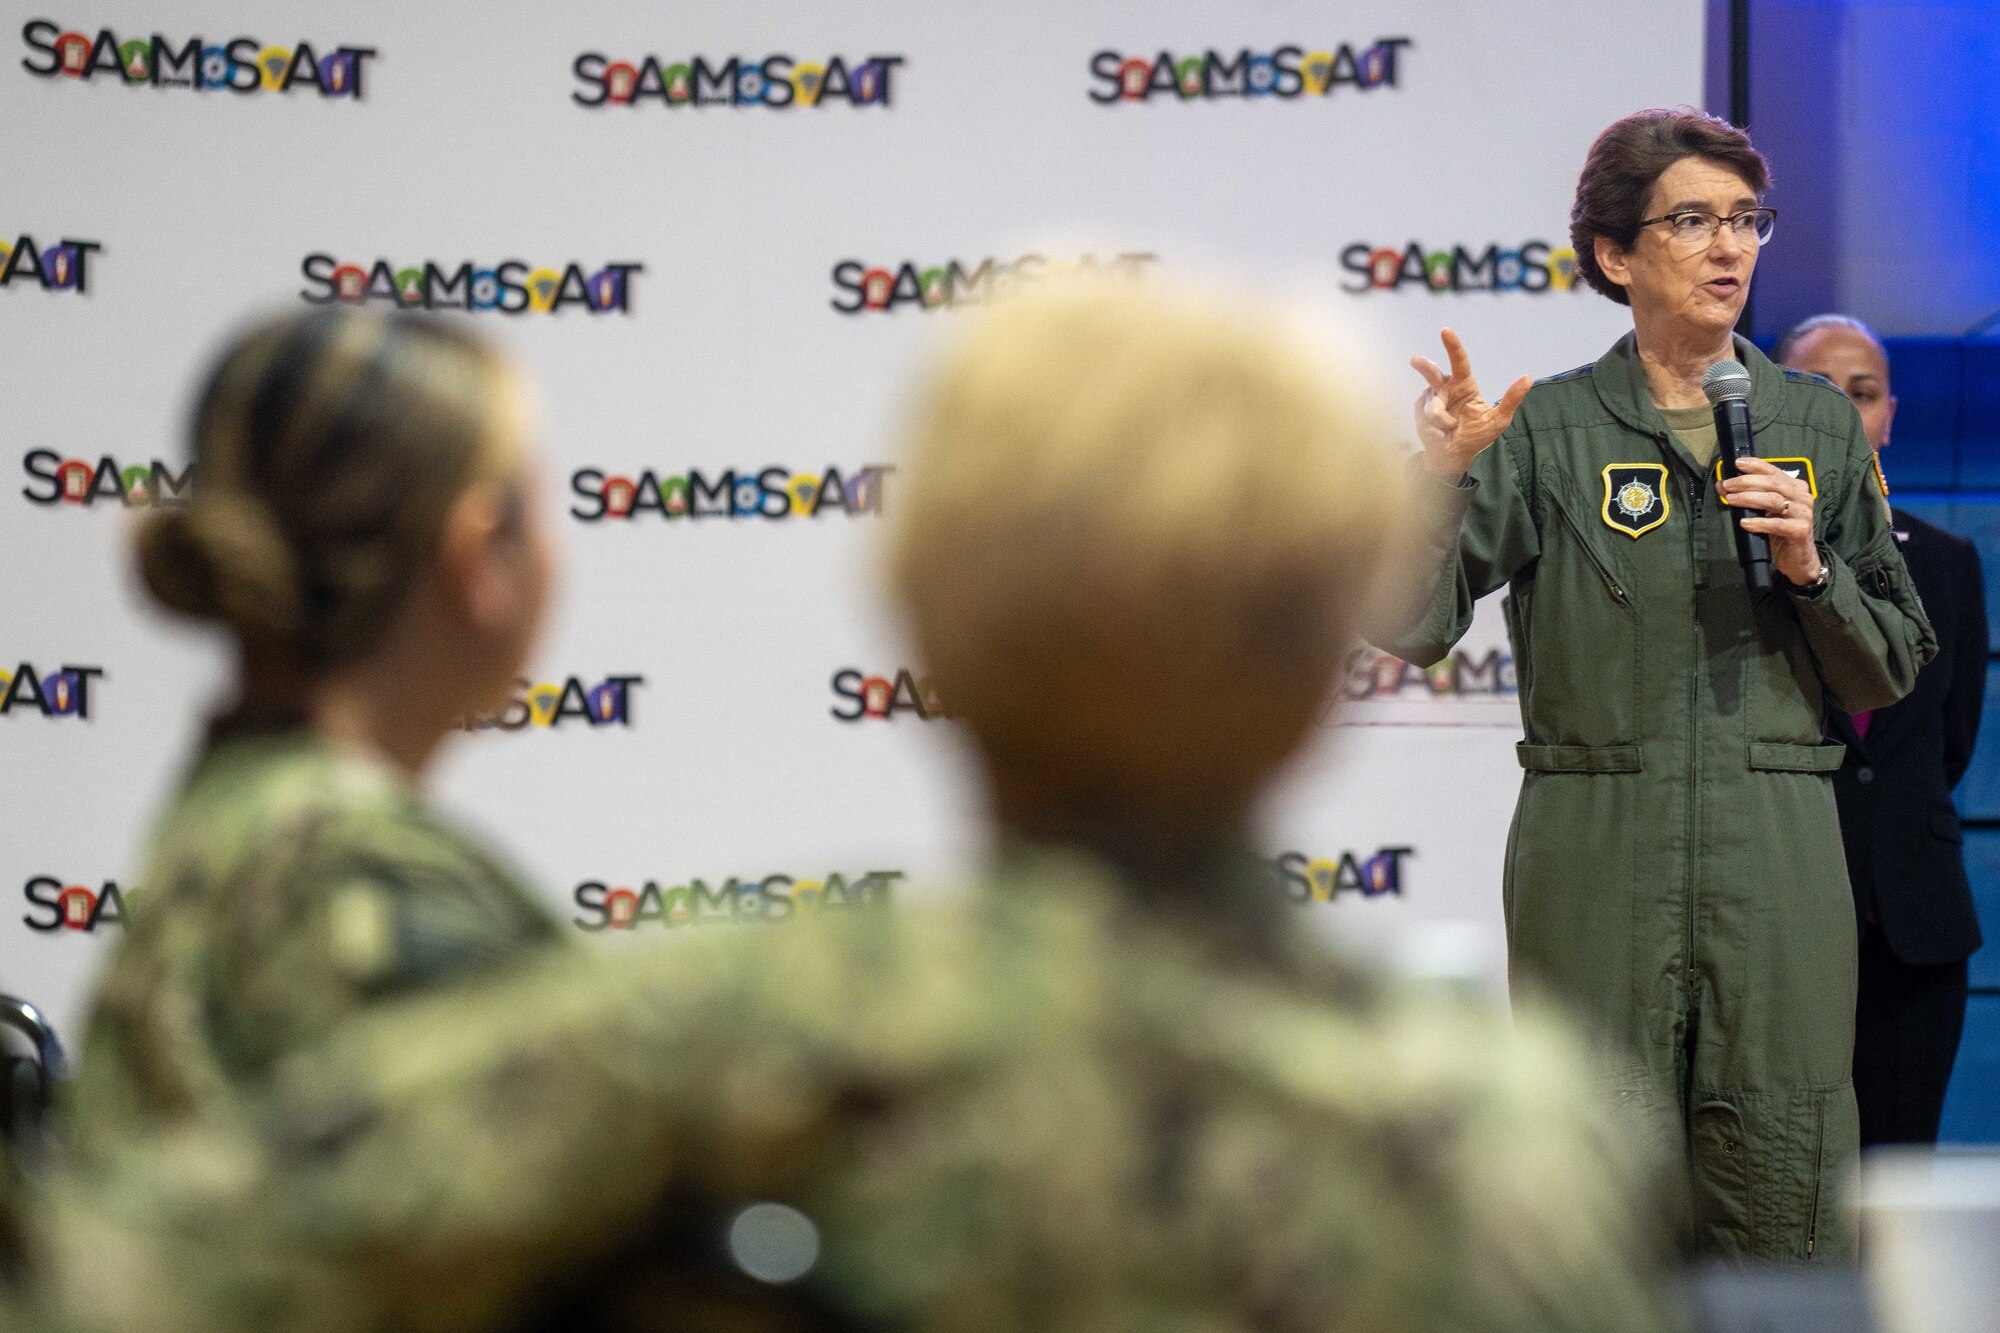 Gen. Jacqueline Van Ovost, commander of U.S. Transportation Command, explains to senior medical representatives from the other services about Exercise Ultimate Caduceus, March 3, 2022. The USTRANSCOM-led annual field training exercise is designed to simulate bringing injured troops from outside the continental U.S. to advanced care centers stateside. (U.S. Navy Photo by Mass Communication Specialist 1st Class David Kolmel)